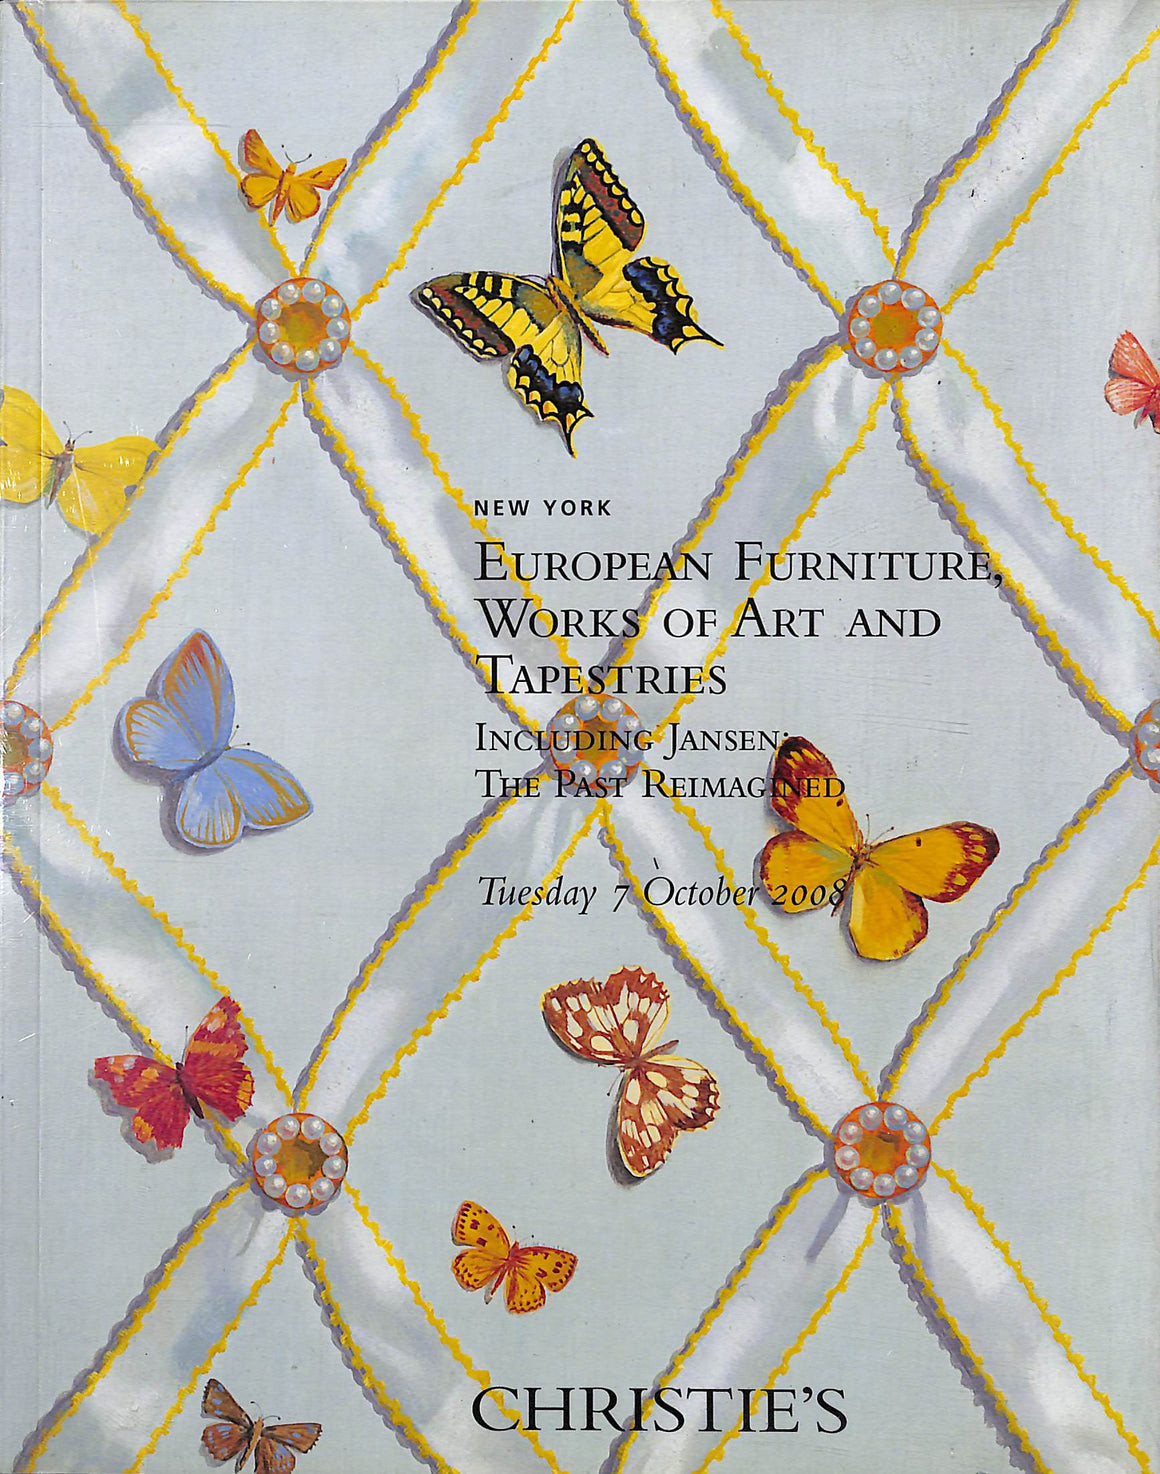 European Furniture Works Of Art And Tapestry Including Jansen 2008 Christie's